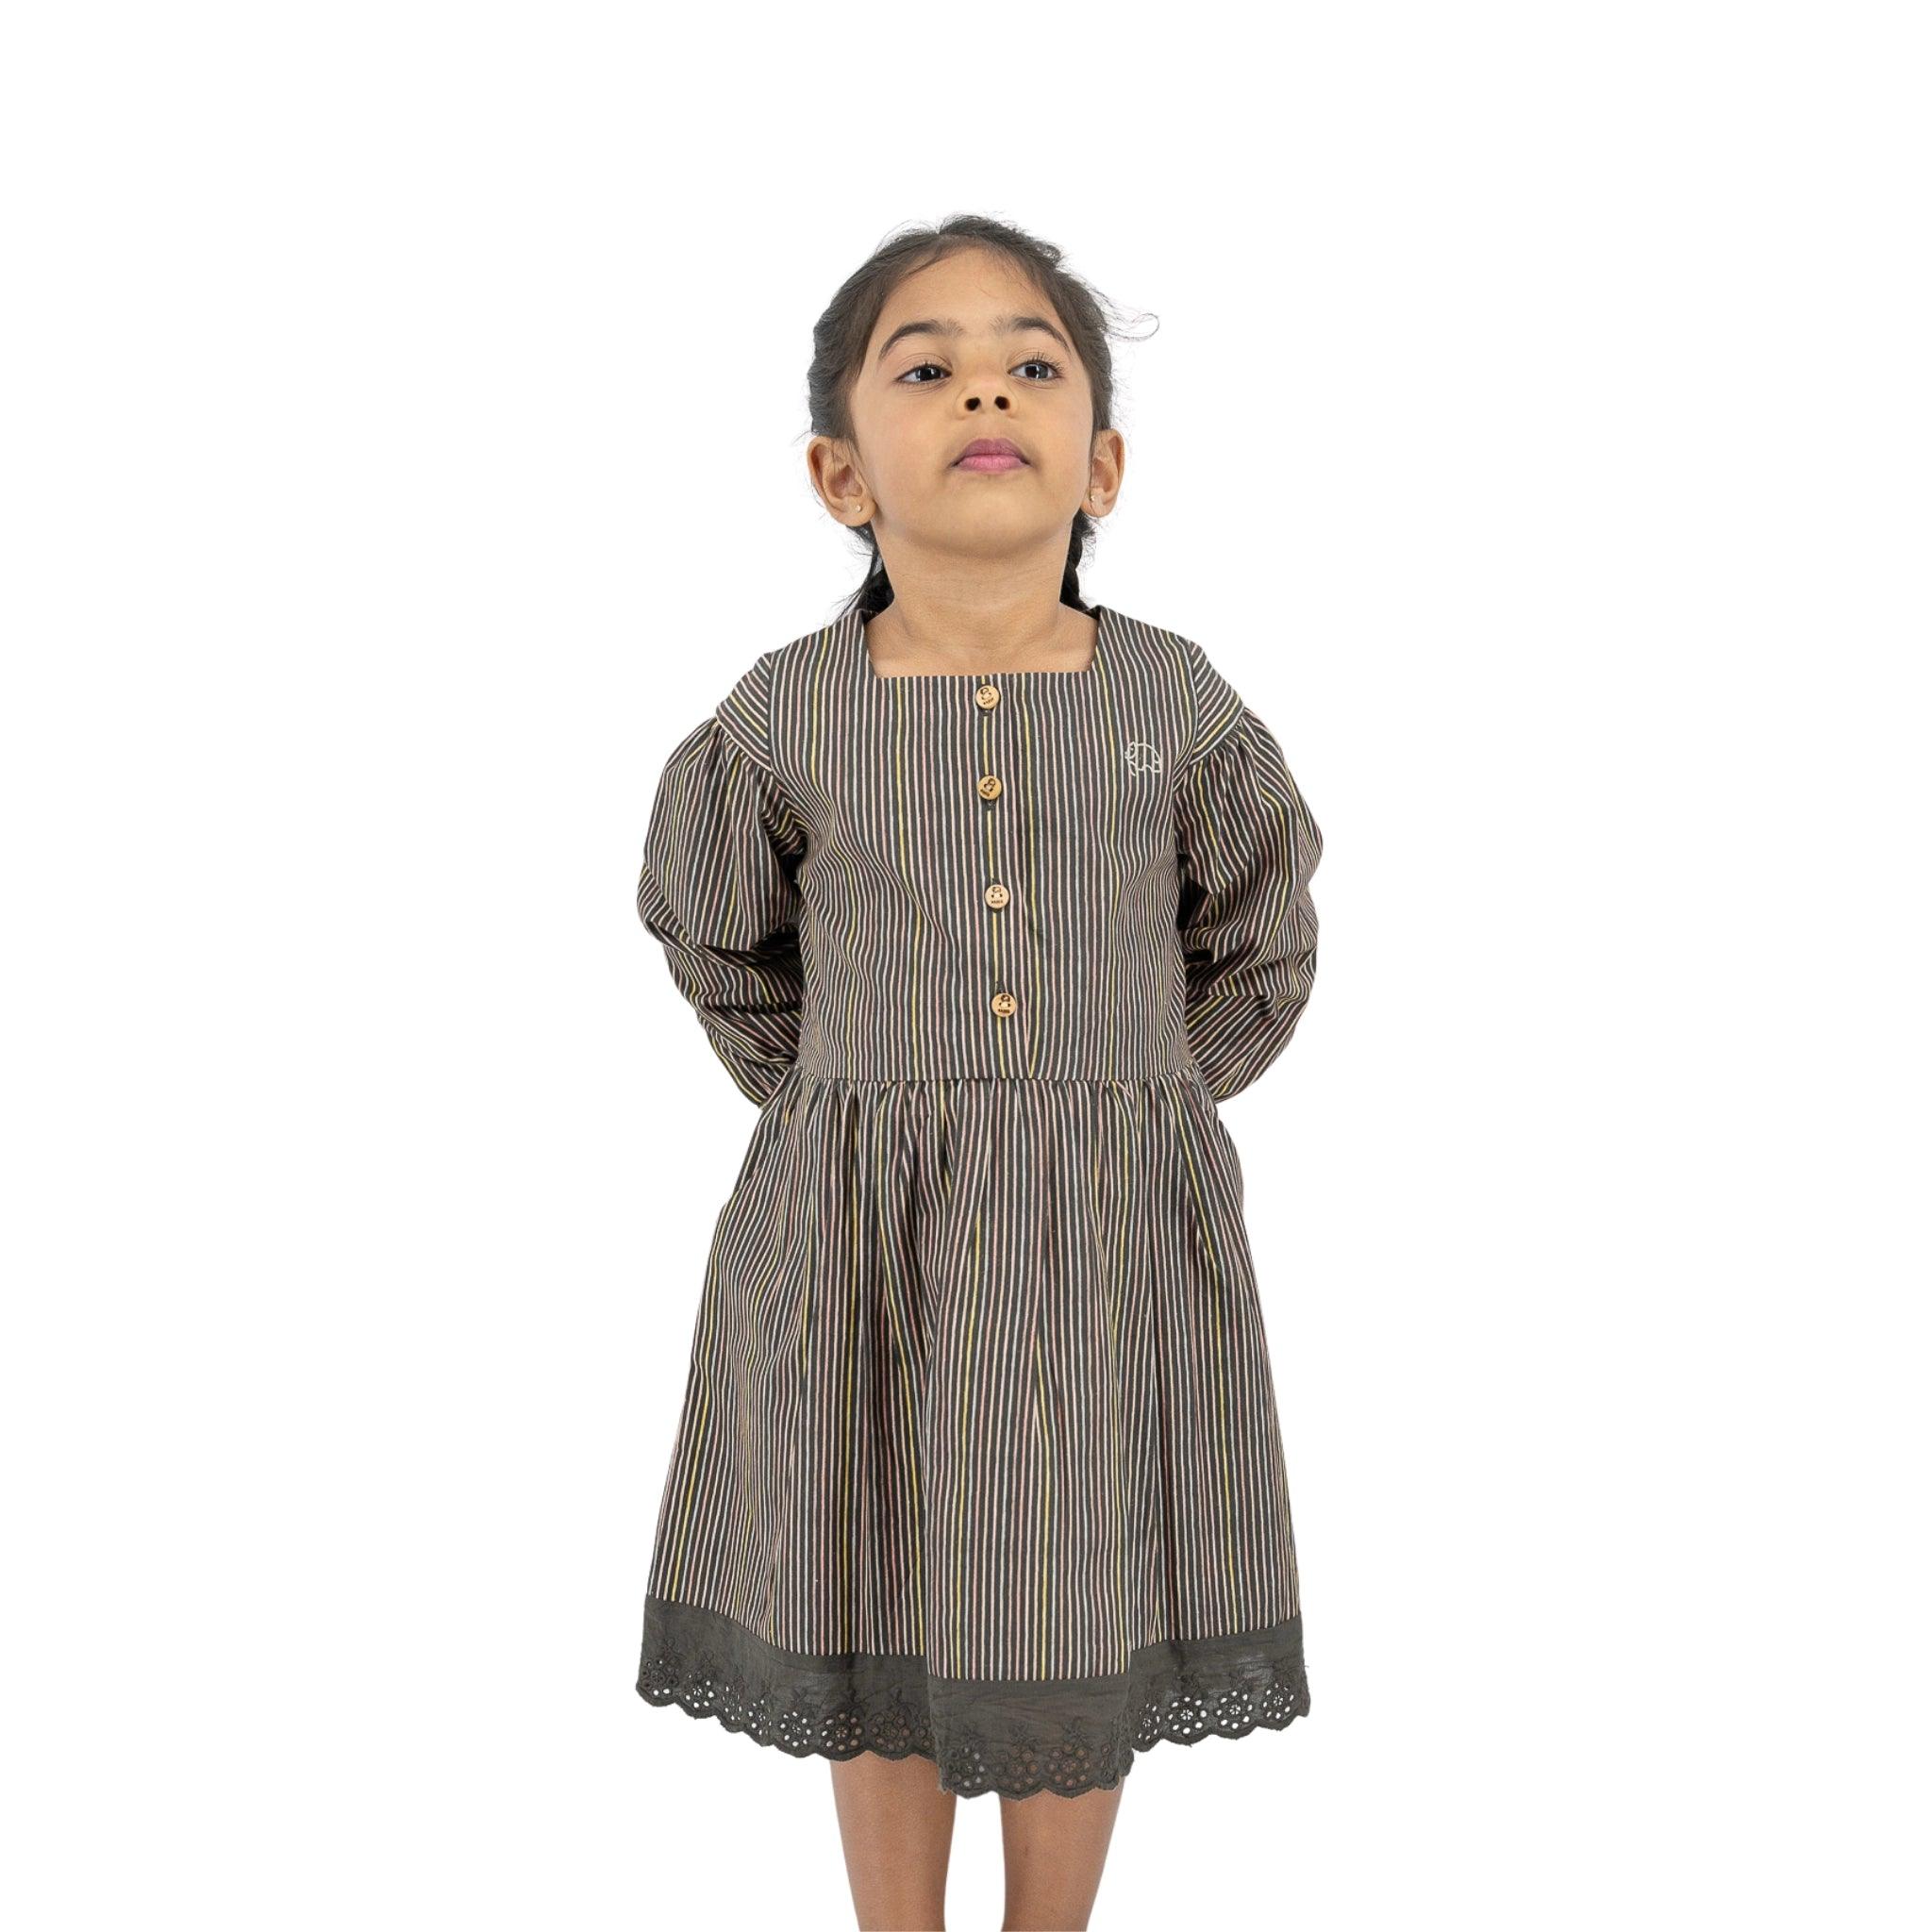 A young girl in a Karee black striped full sleeve cotton dress with lace hem stands confidently, looking upward, isolated on a white background.